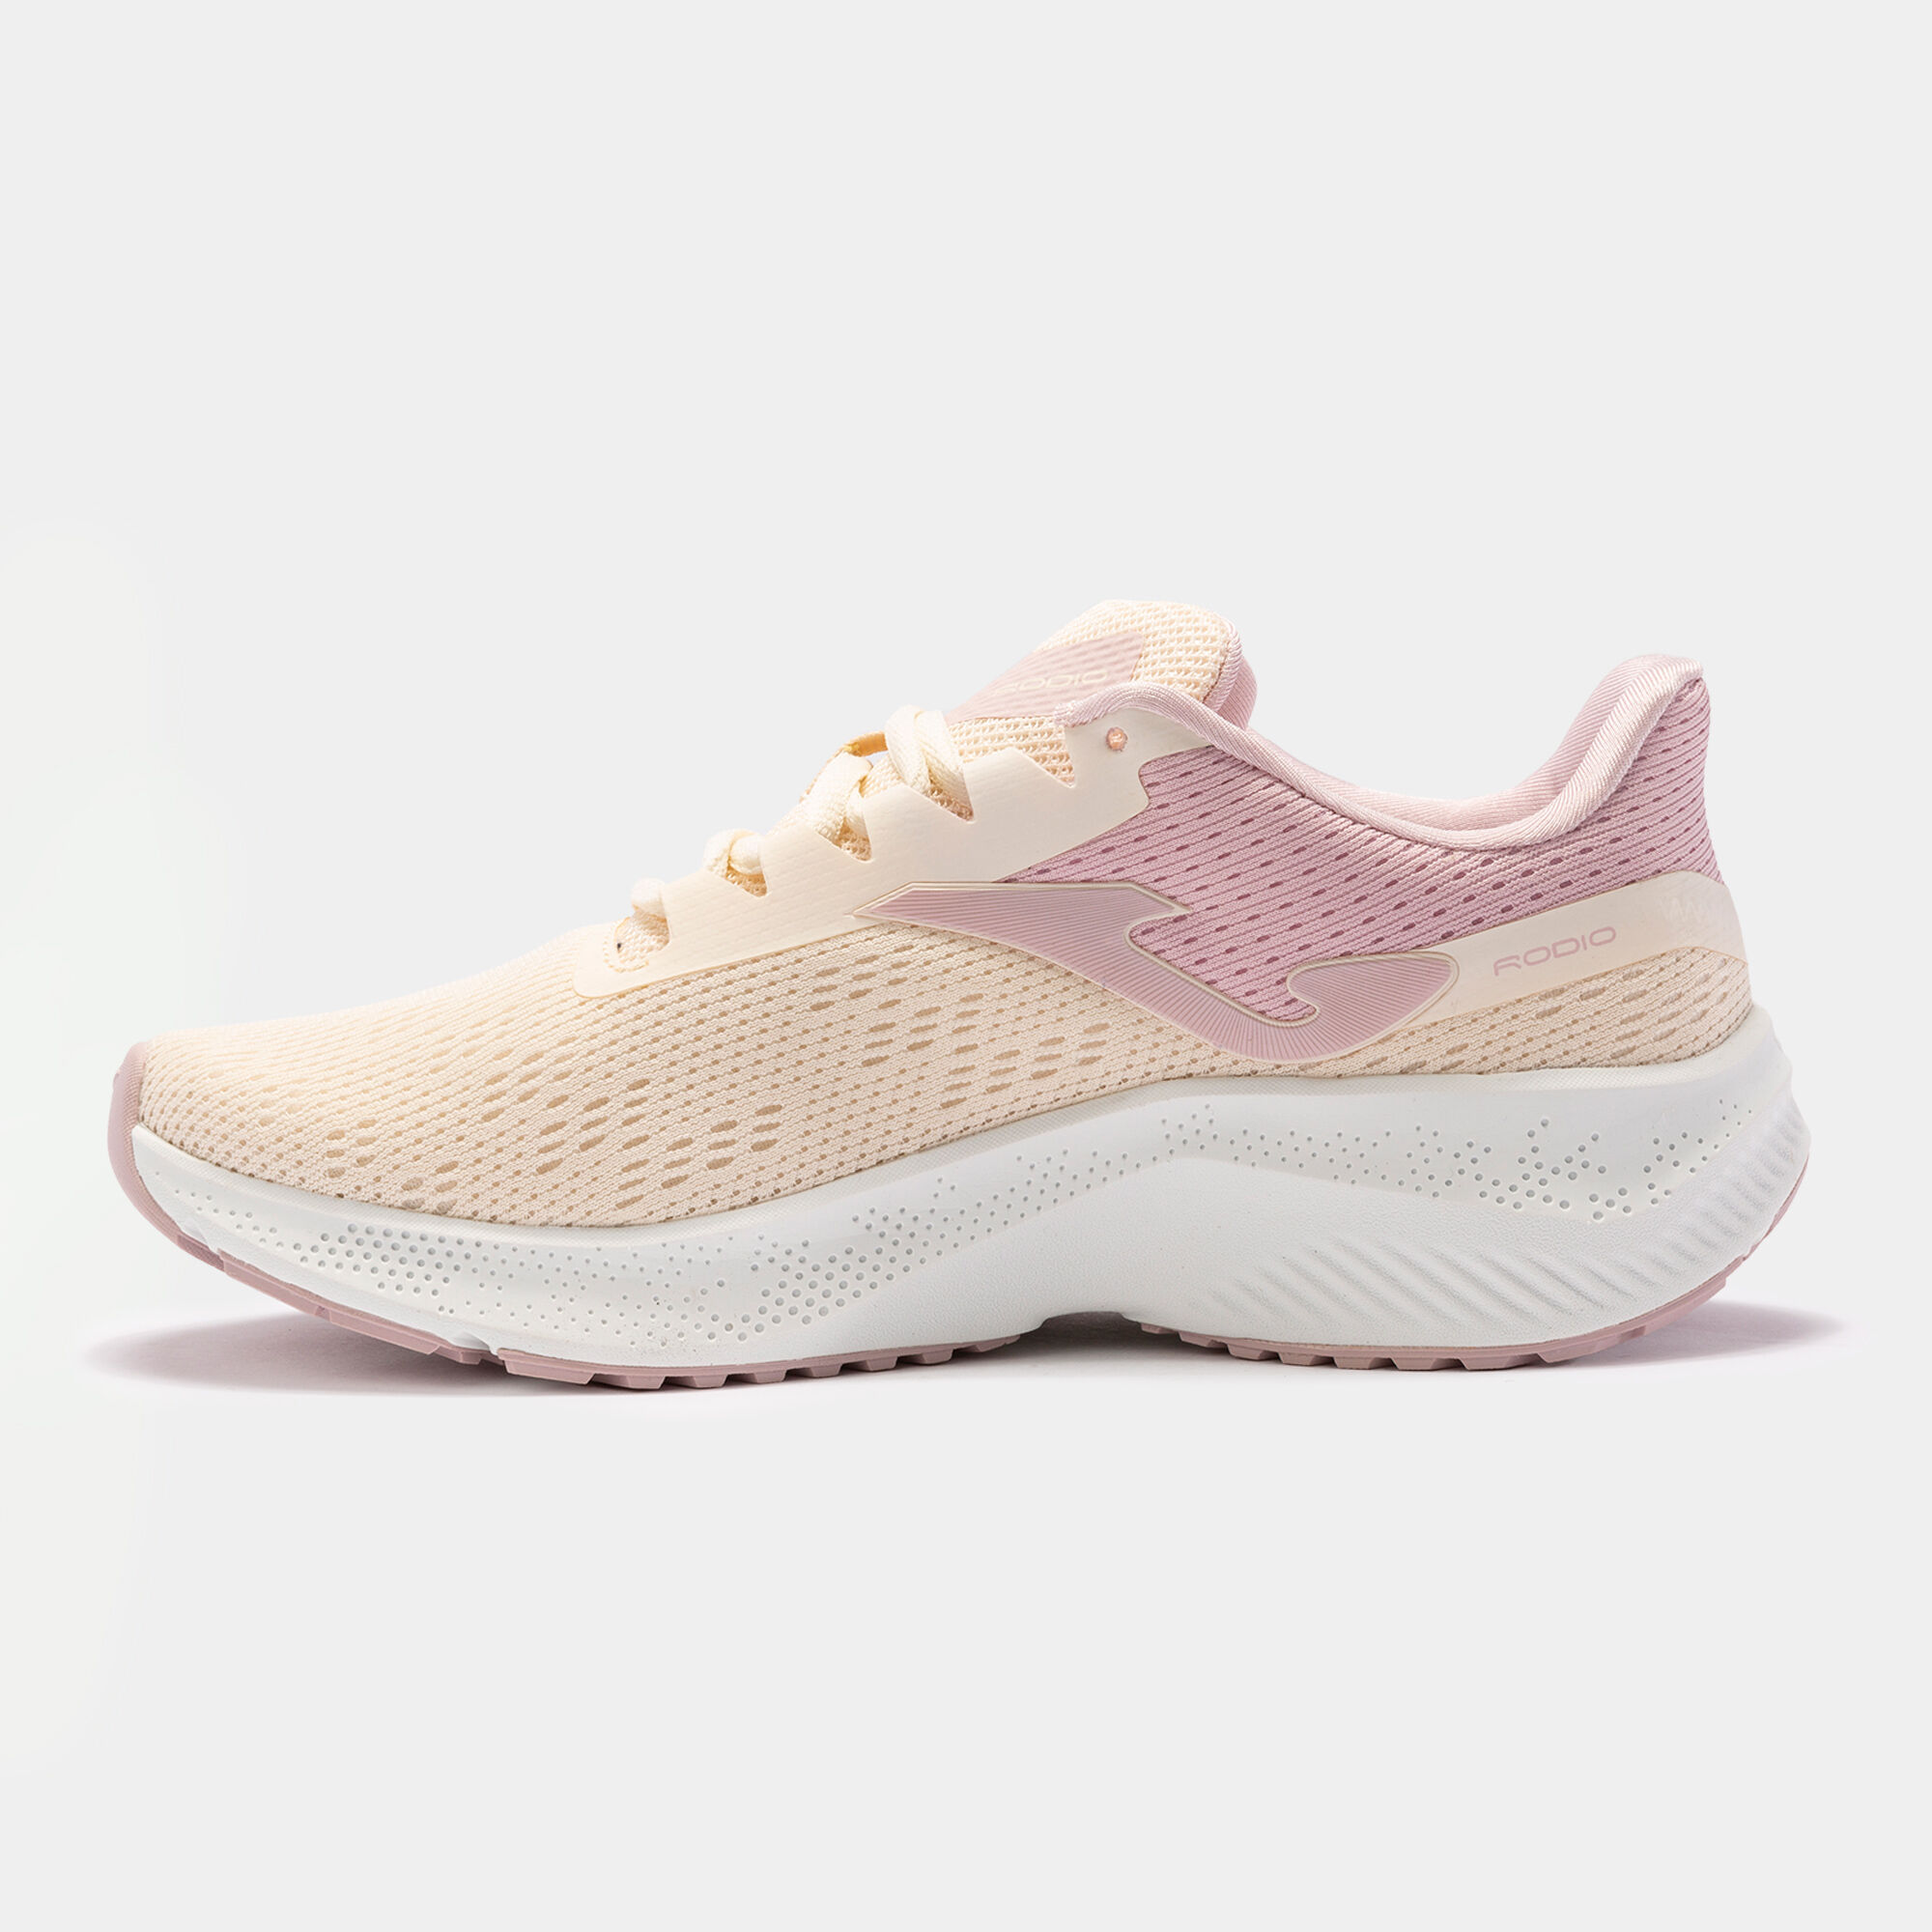 RUNNING SHOES RODIO 22 WOMAN BEIGE